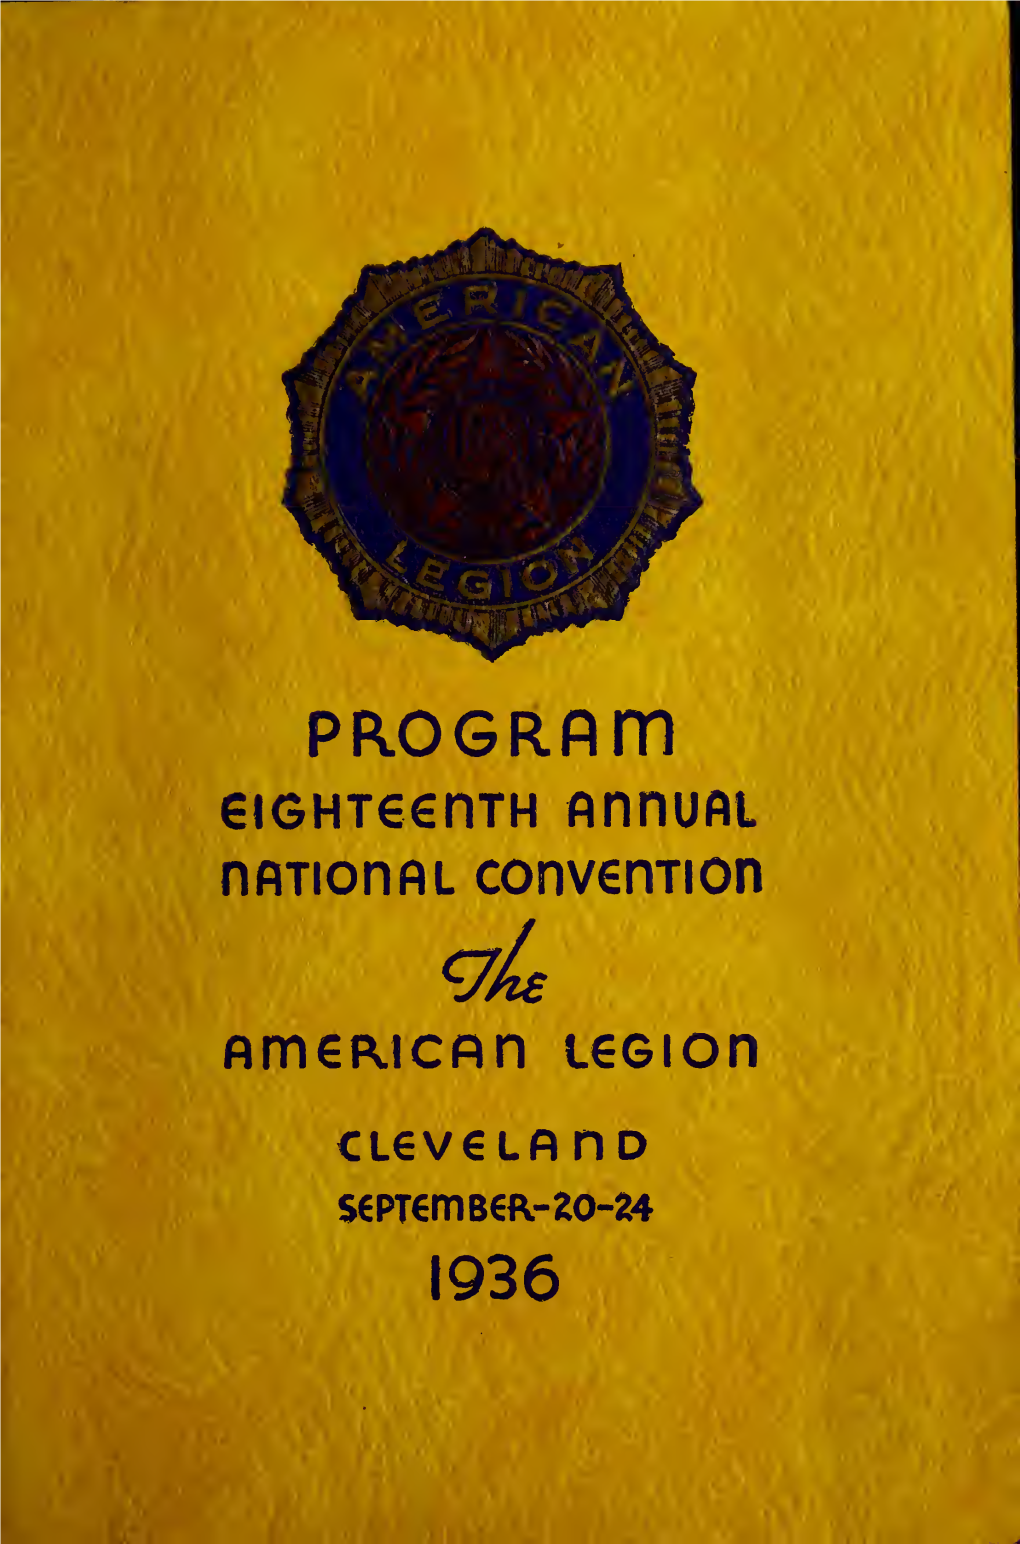 The American Legion 18Th National Convention: Official Program [1936]